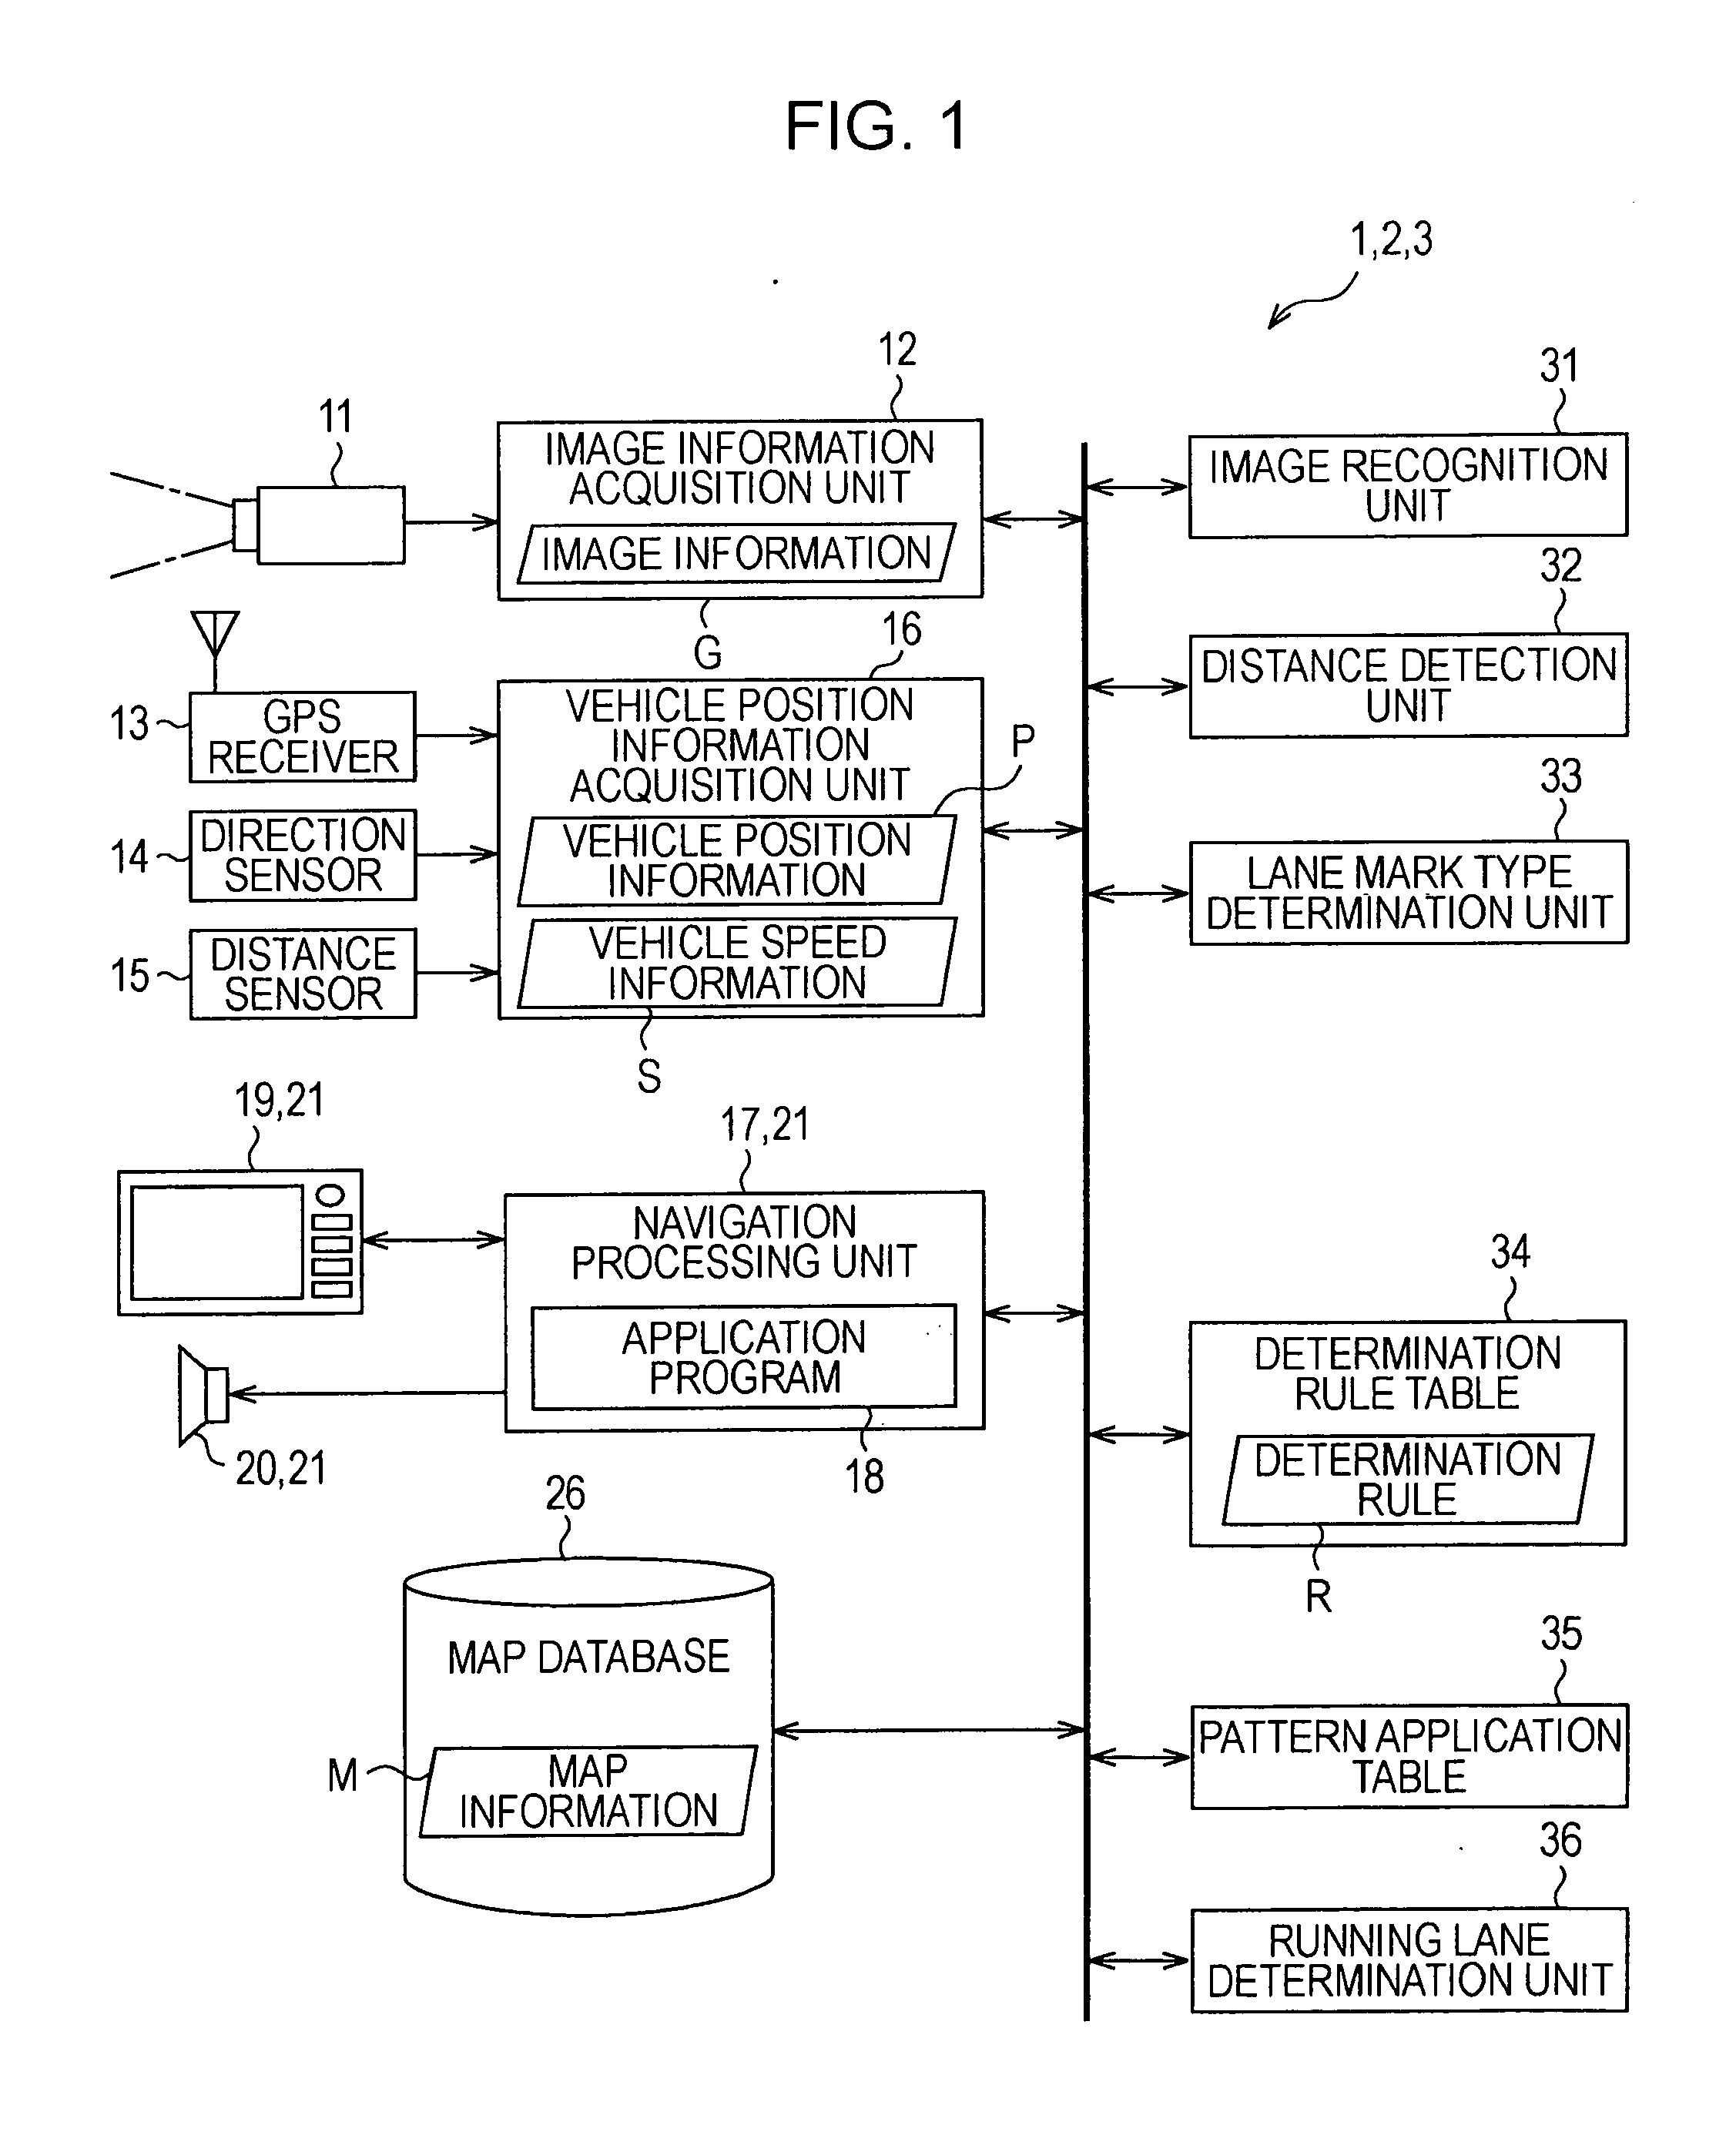 Image recognition apparatuses, methods and programs